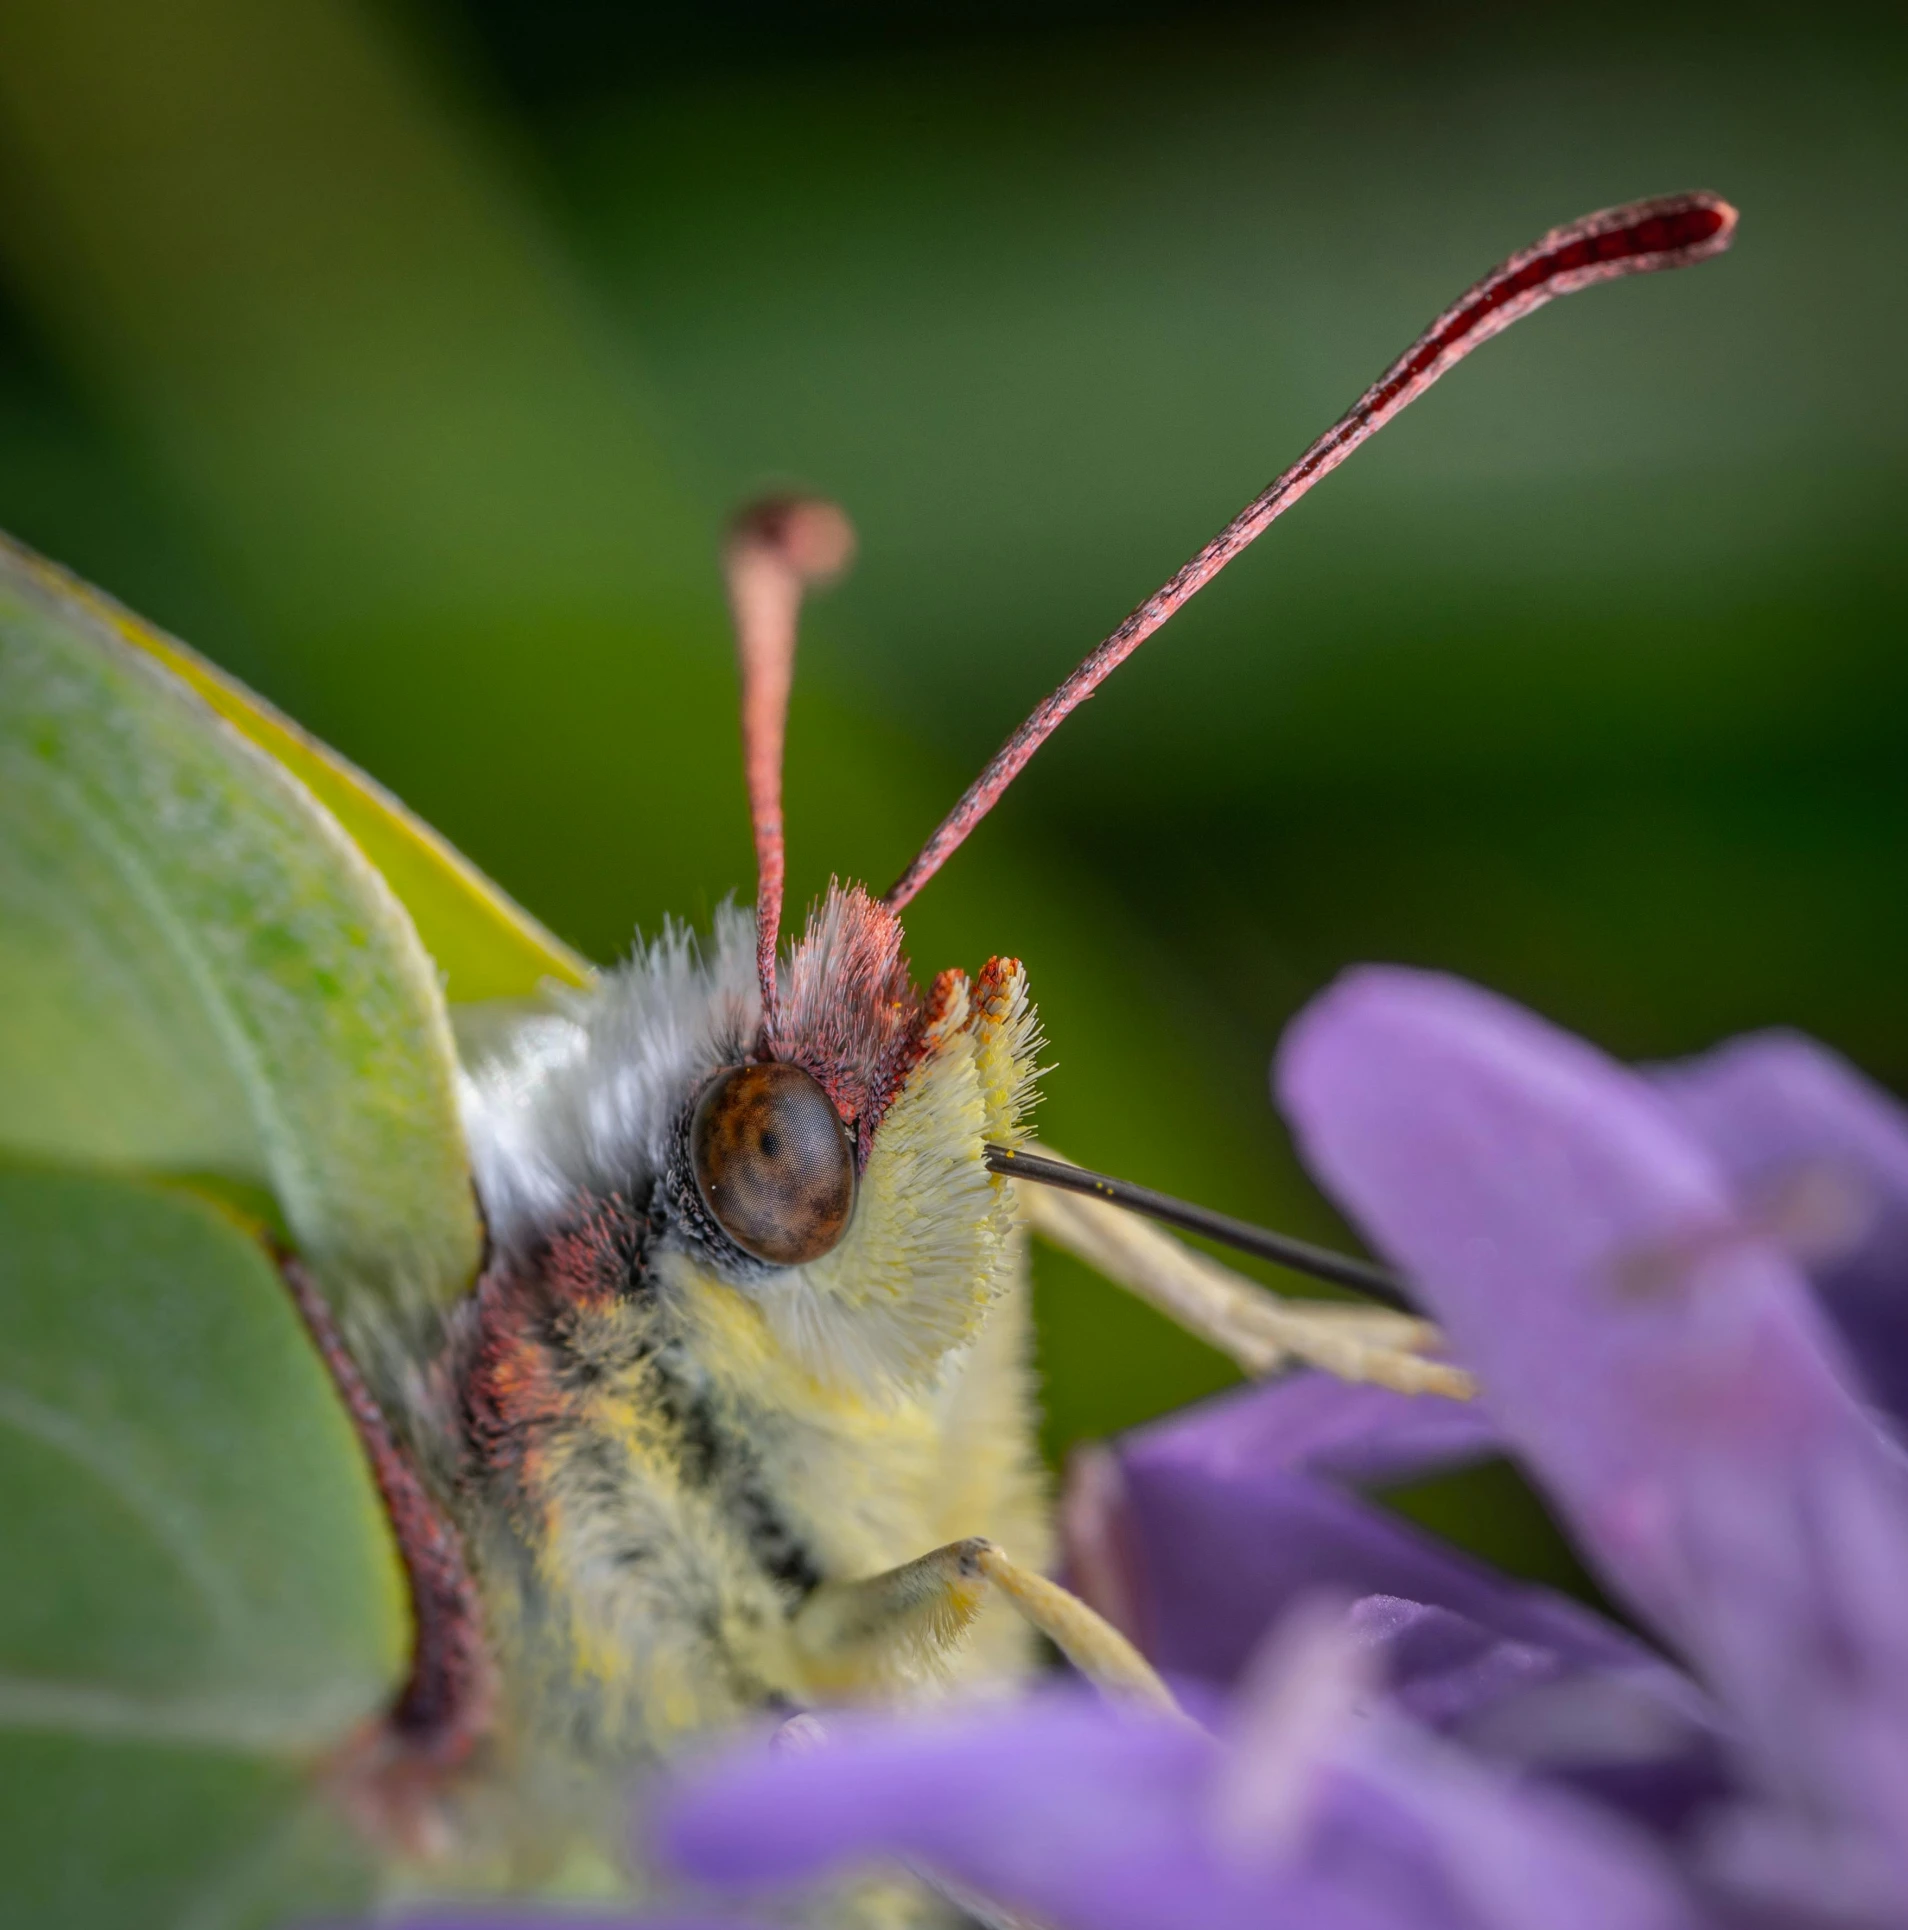 a close up view of a small insect on purple flowers